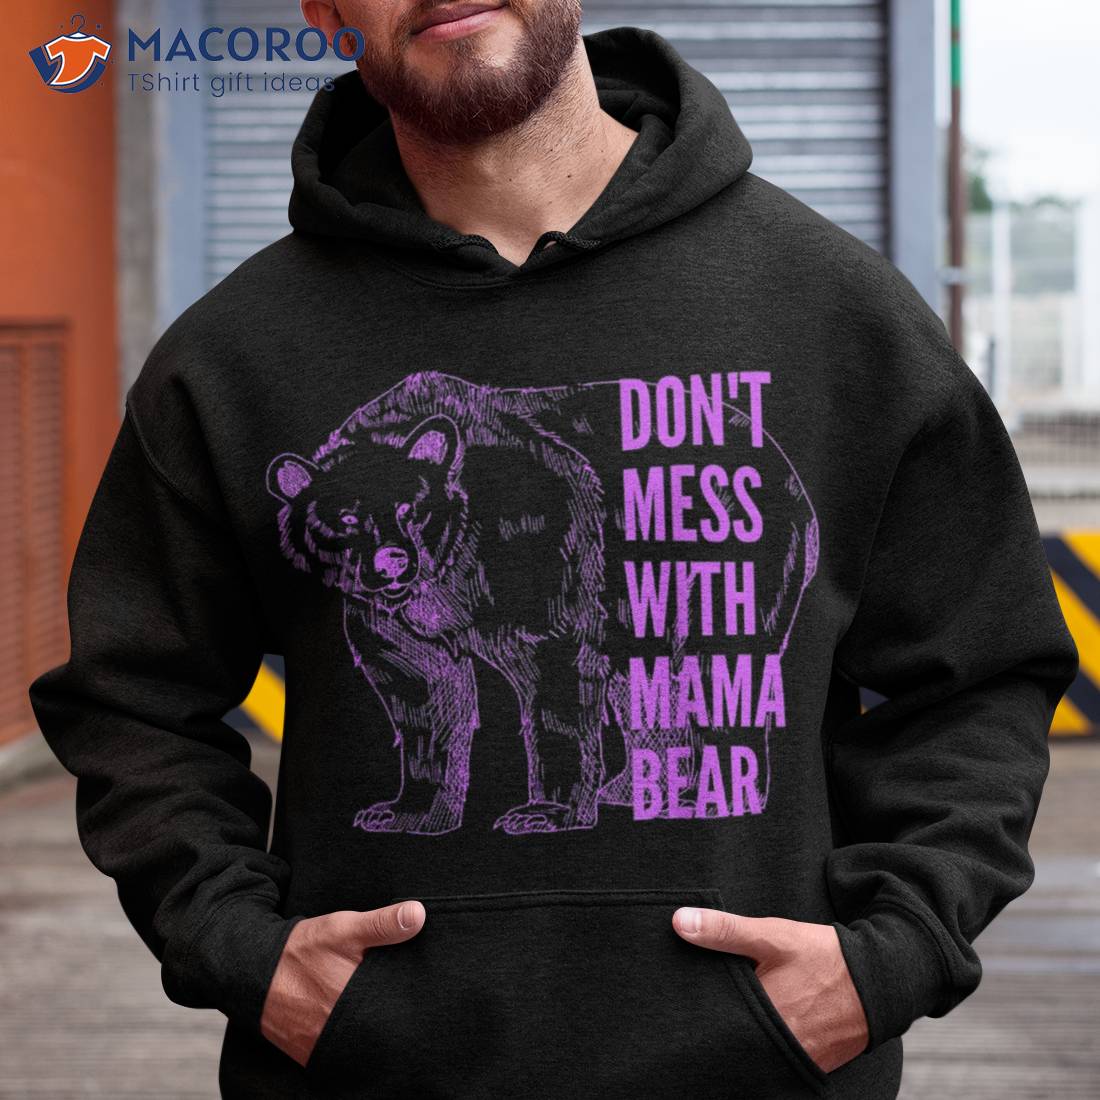 https://images.macoroo.com/wp-content/uploads/2023/05/mothers-day-don-t-mess-with-mama-bear-gifts-shirt-hoodie.jpg